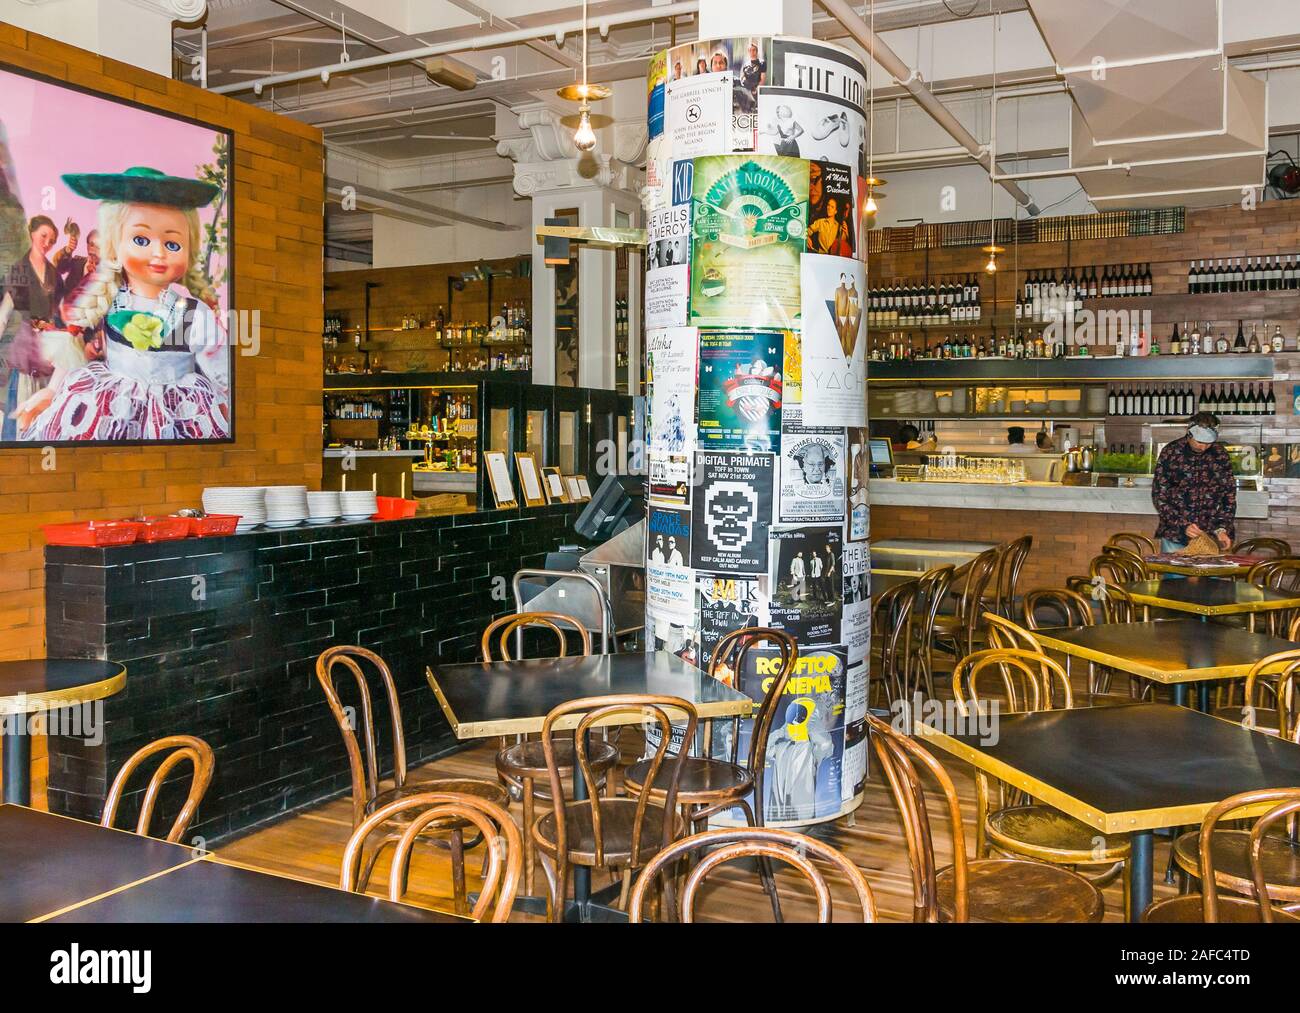 Melbourne, Australia - December 17, 2009: Cookie Thai eatery and beer hall. Cylindrical board around pillar displays posters for events and other mess Stock Photo